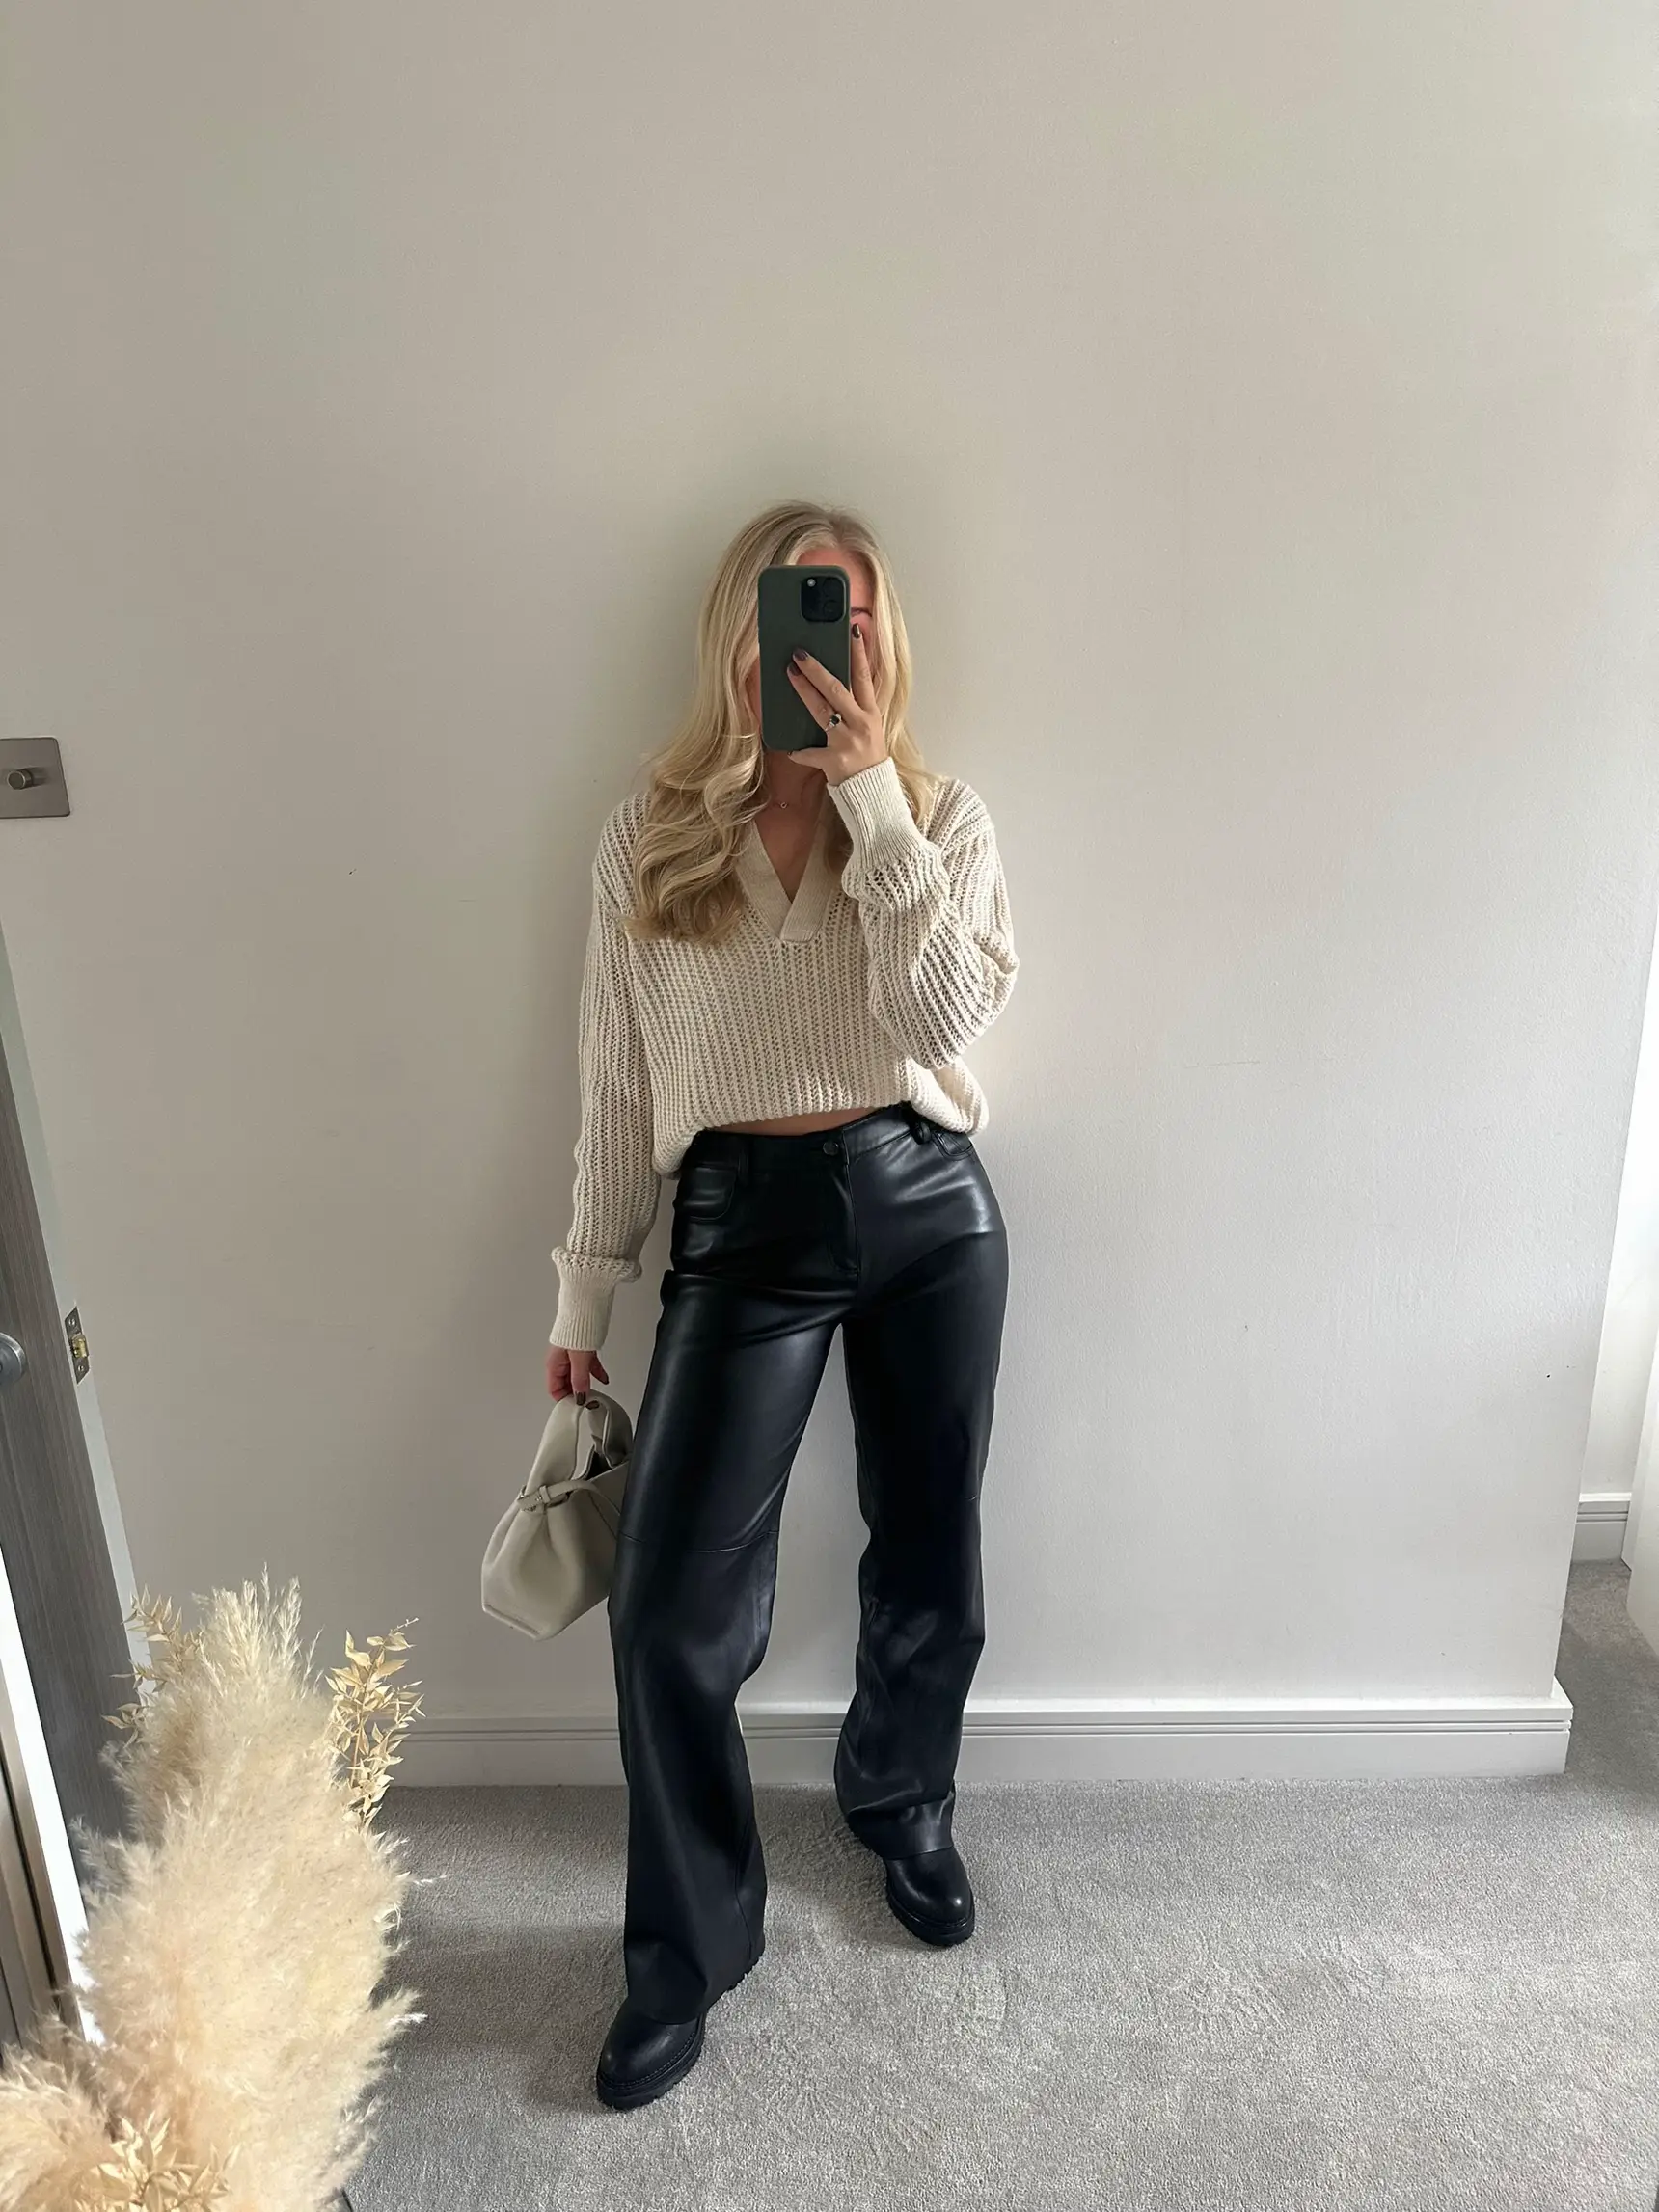 Clever Lady - 👉Types of Pants  Women's Trousers Styles & Trends  👉 Pants are an essential must-have in every  girl's wardrobe. From different types of jeans to basic trousers, find all